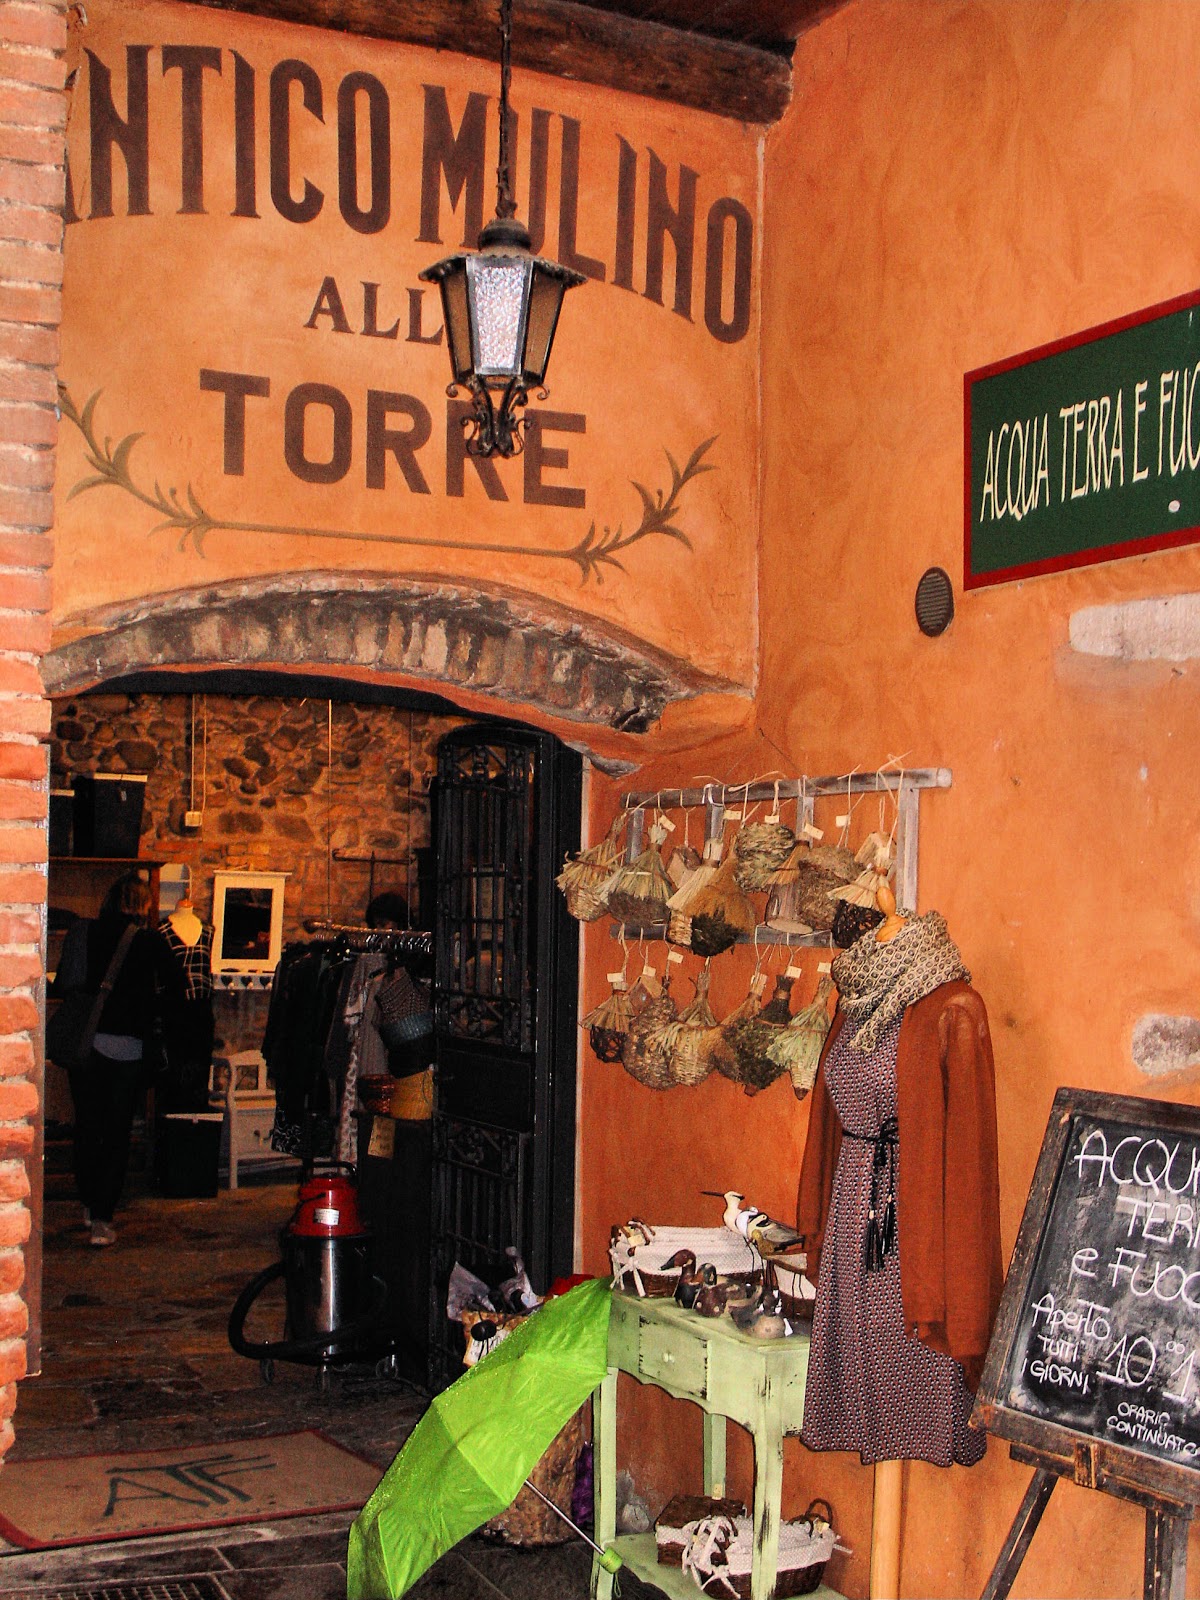 Medieval shops still open for business in Borghetto.